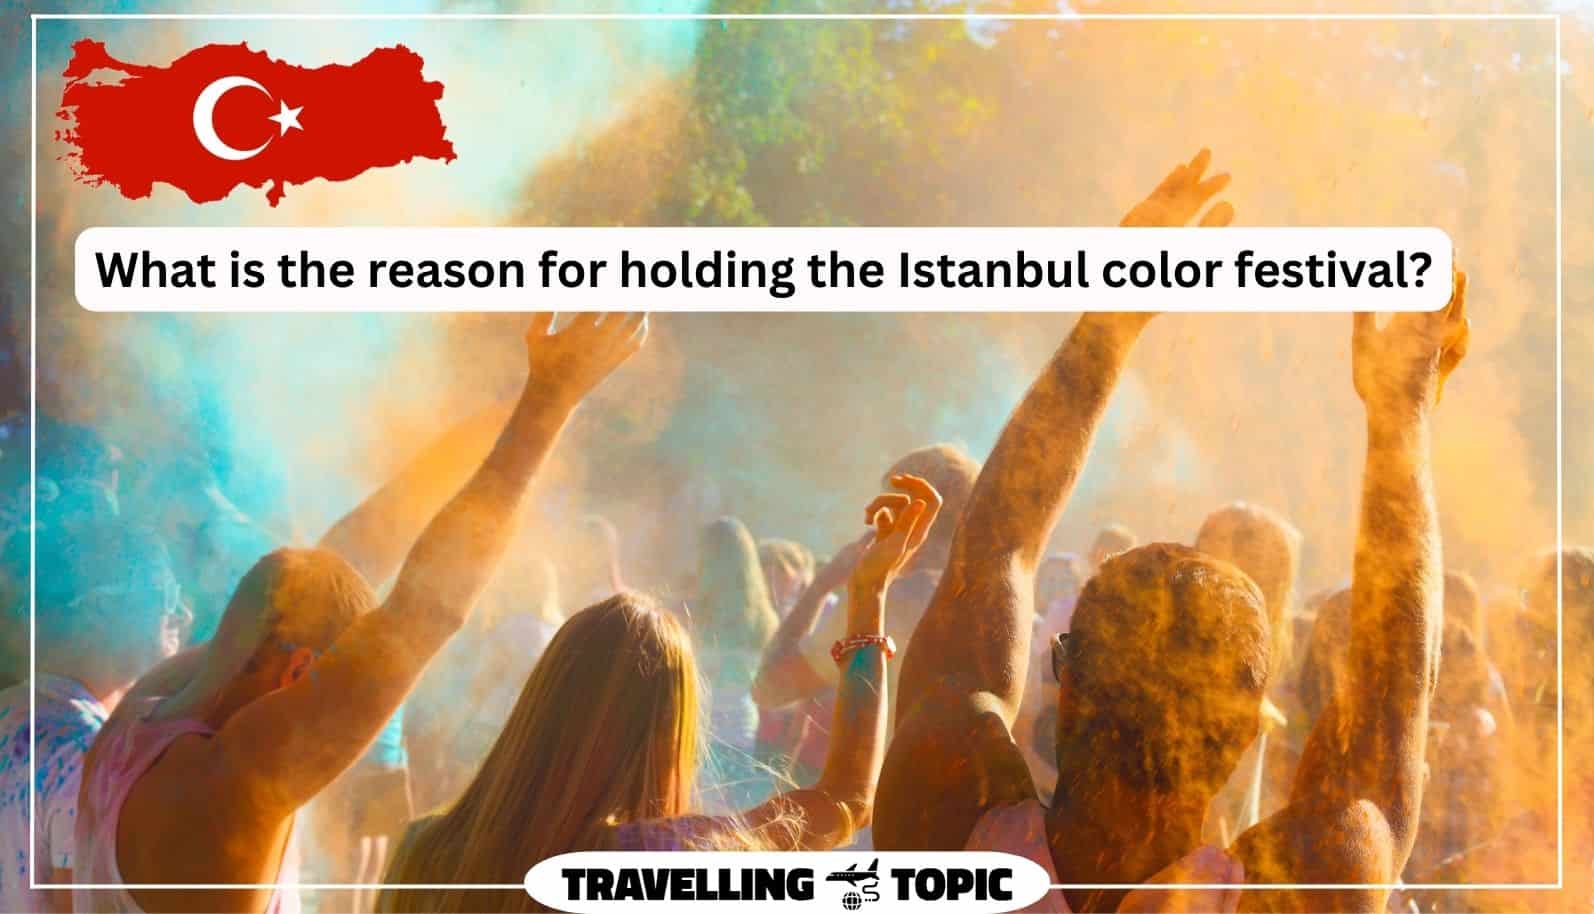 What is the reason for holding the Istanbul color festival